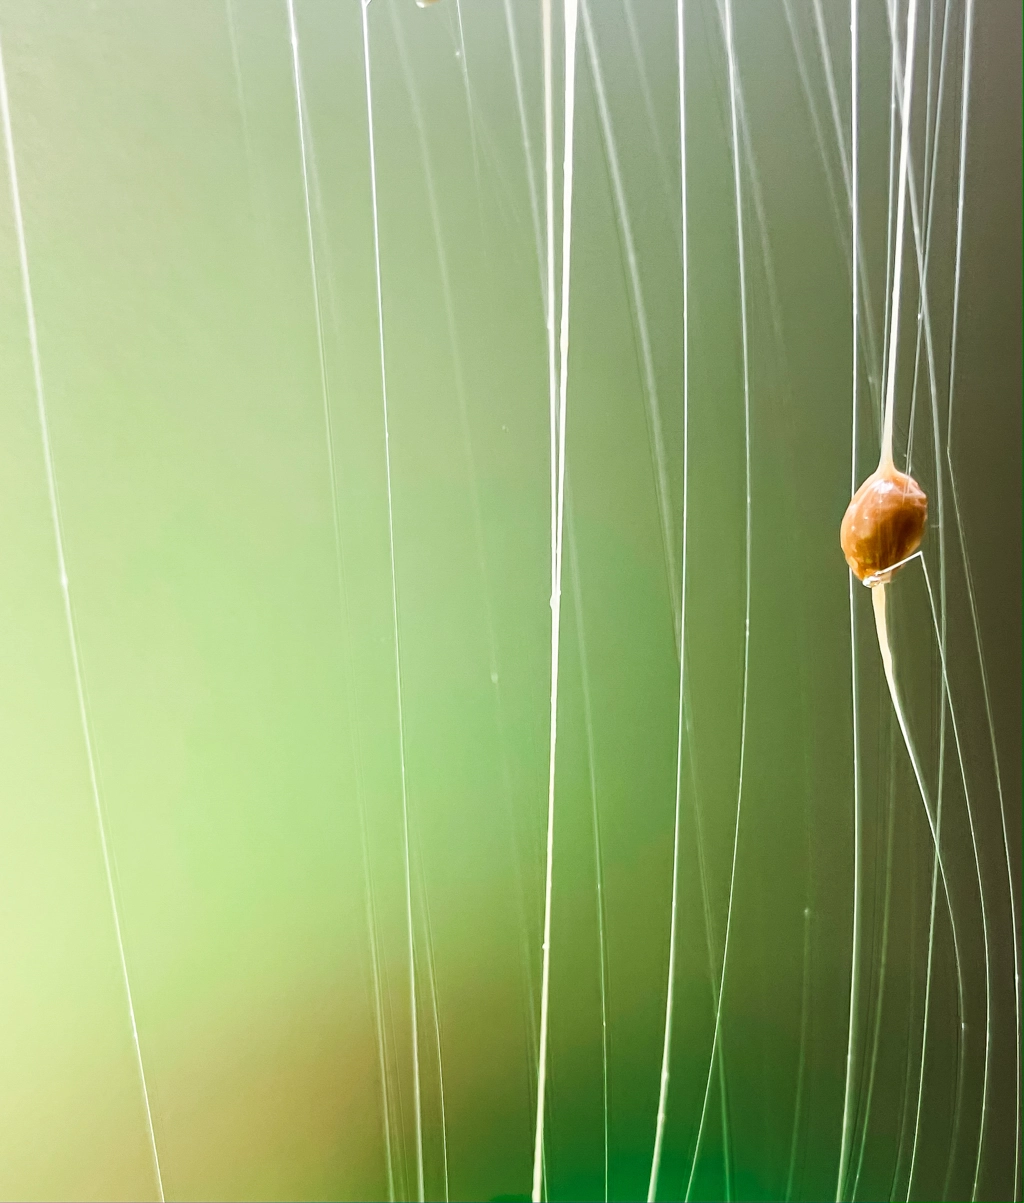 Artwork showing a natto bean suspended in the air via sticky natto strands. The sticky strands continue from the top to the bottom of the image.